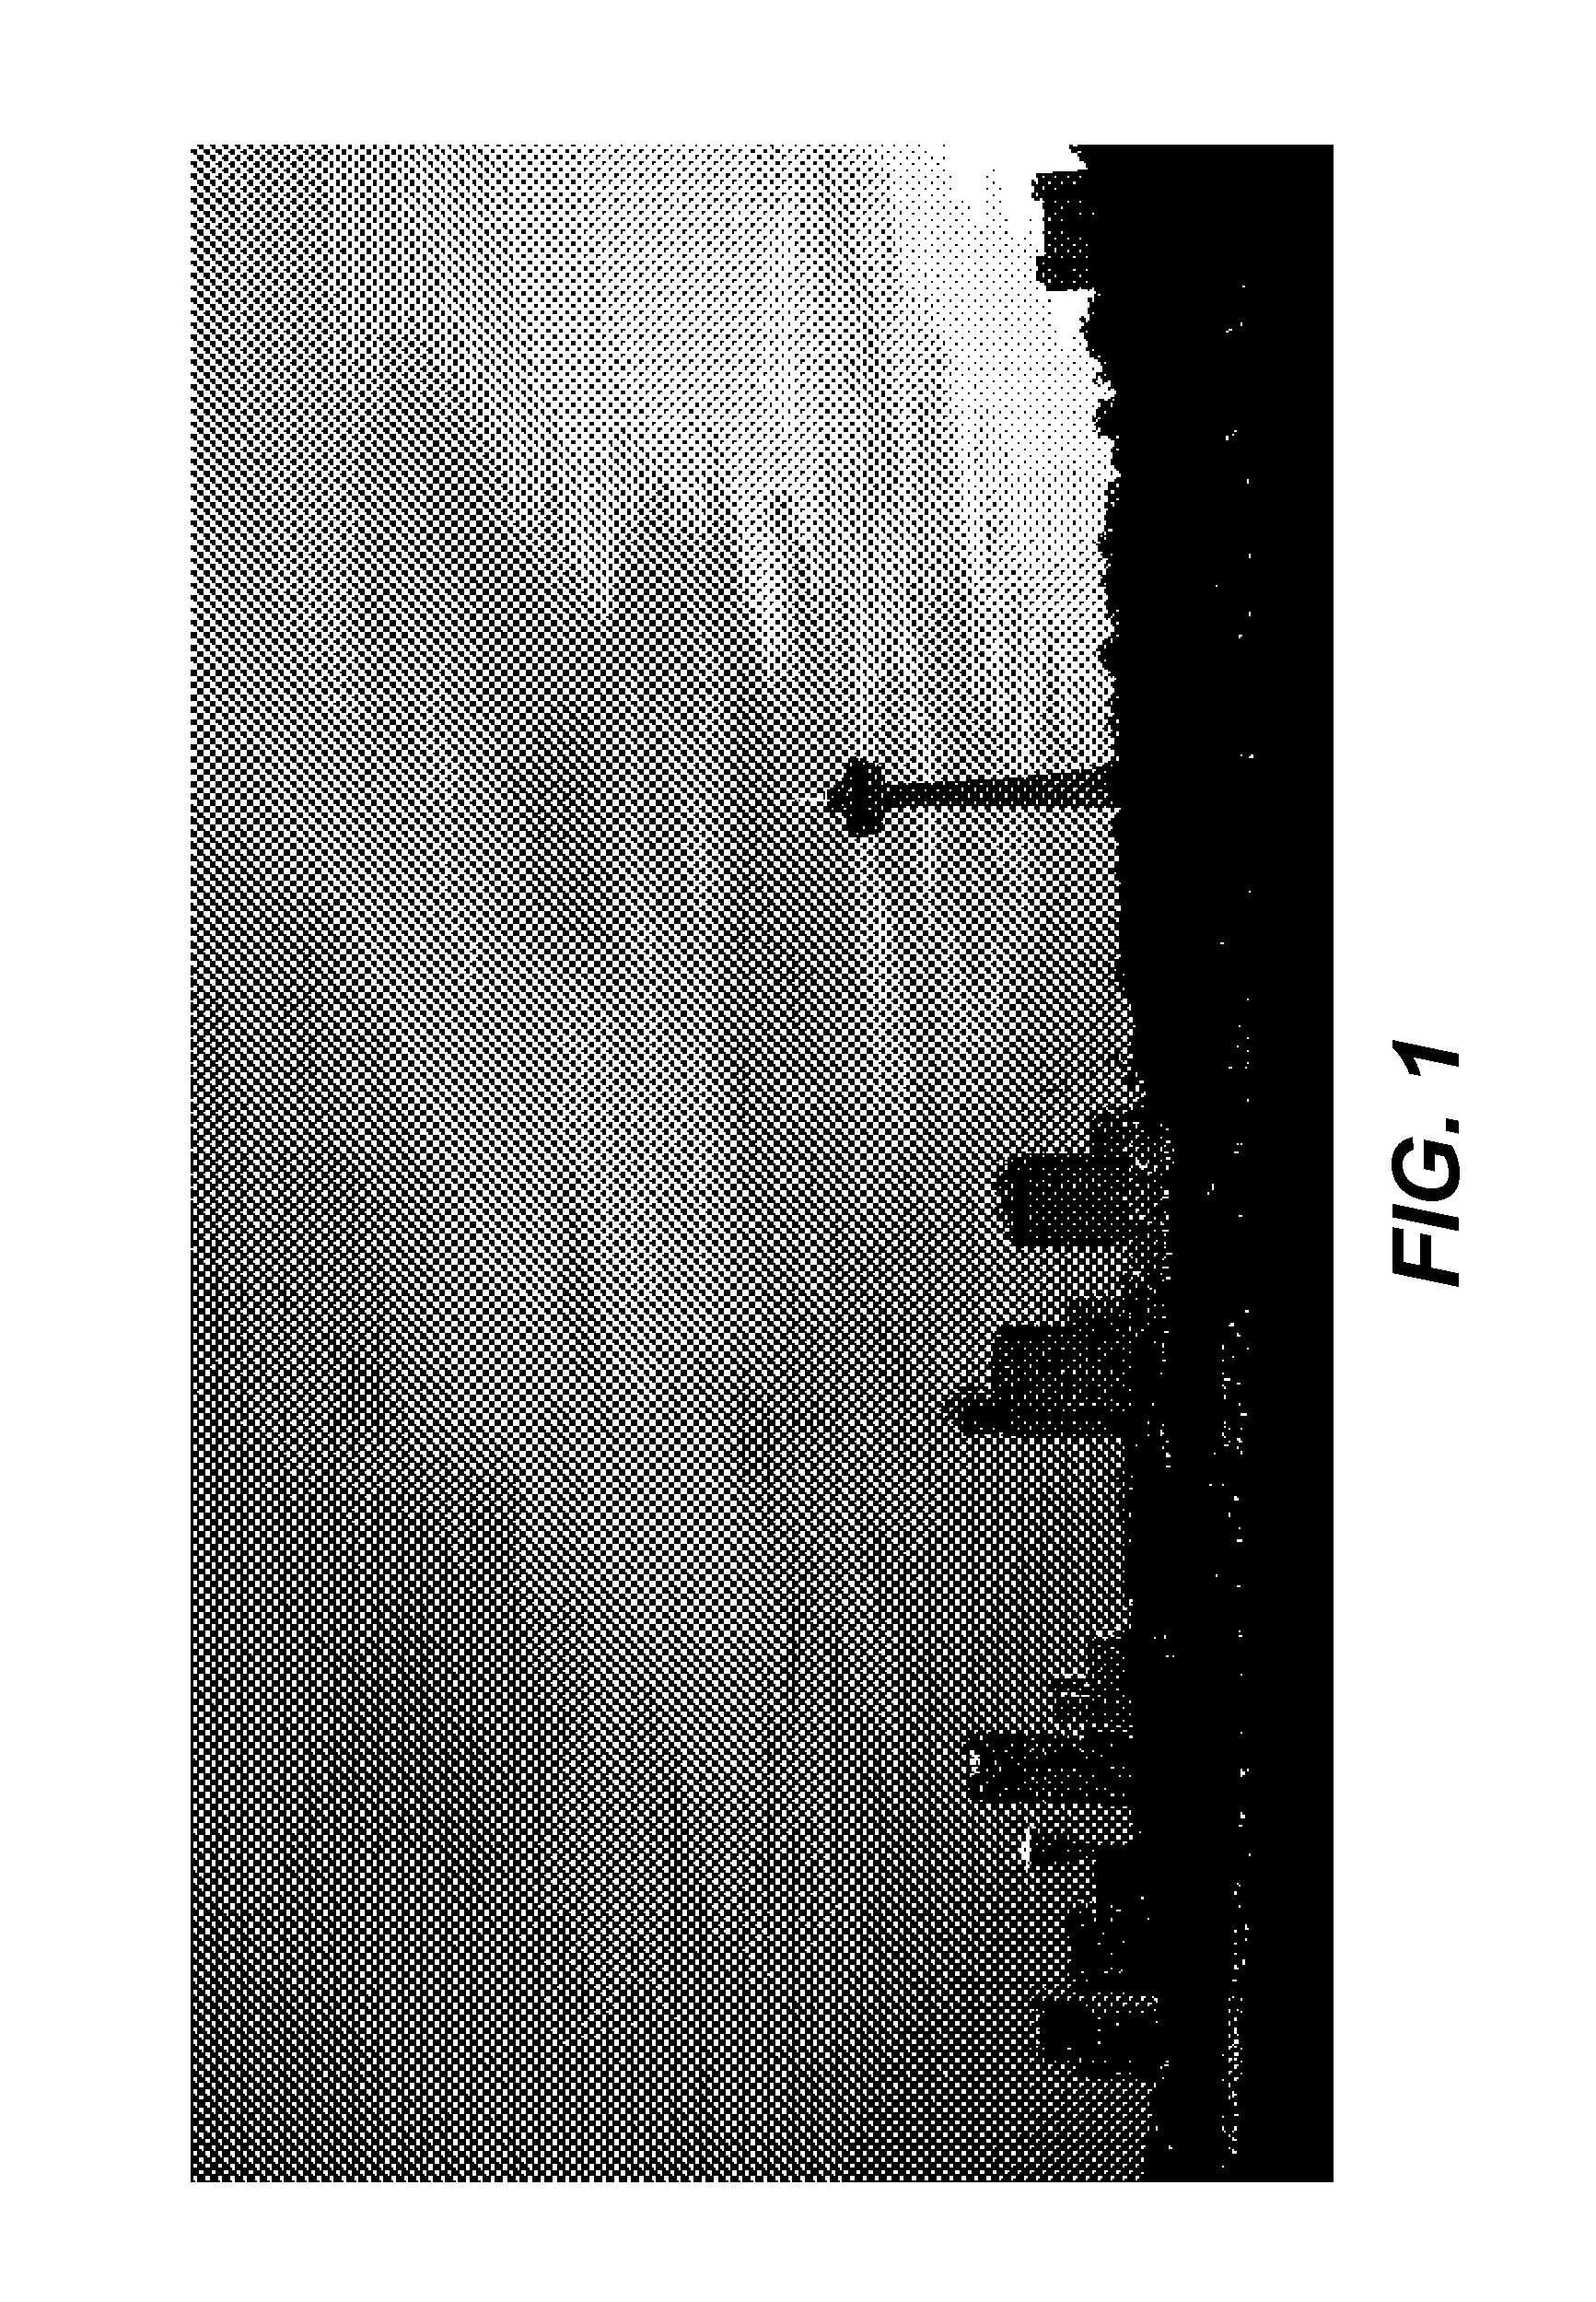 Dynamic illumination control for laser projection display